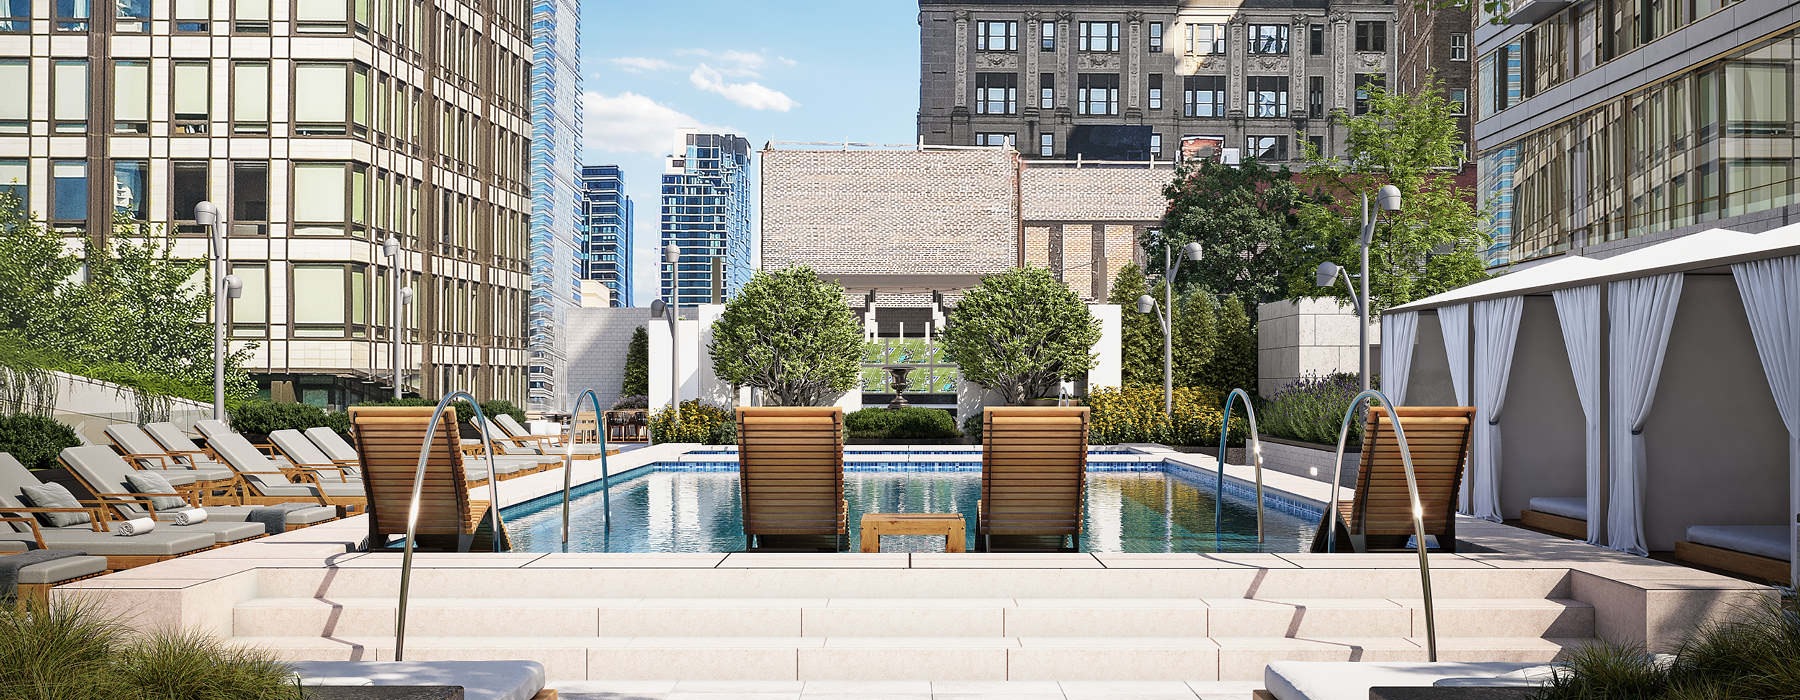 city views from beautiful rooftop pool with lounge chairs